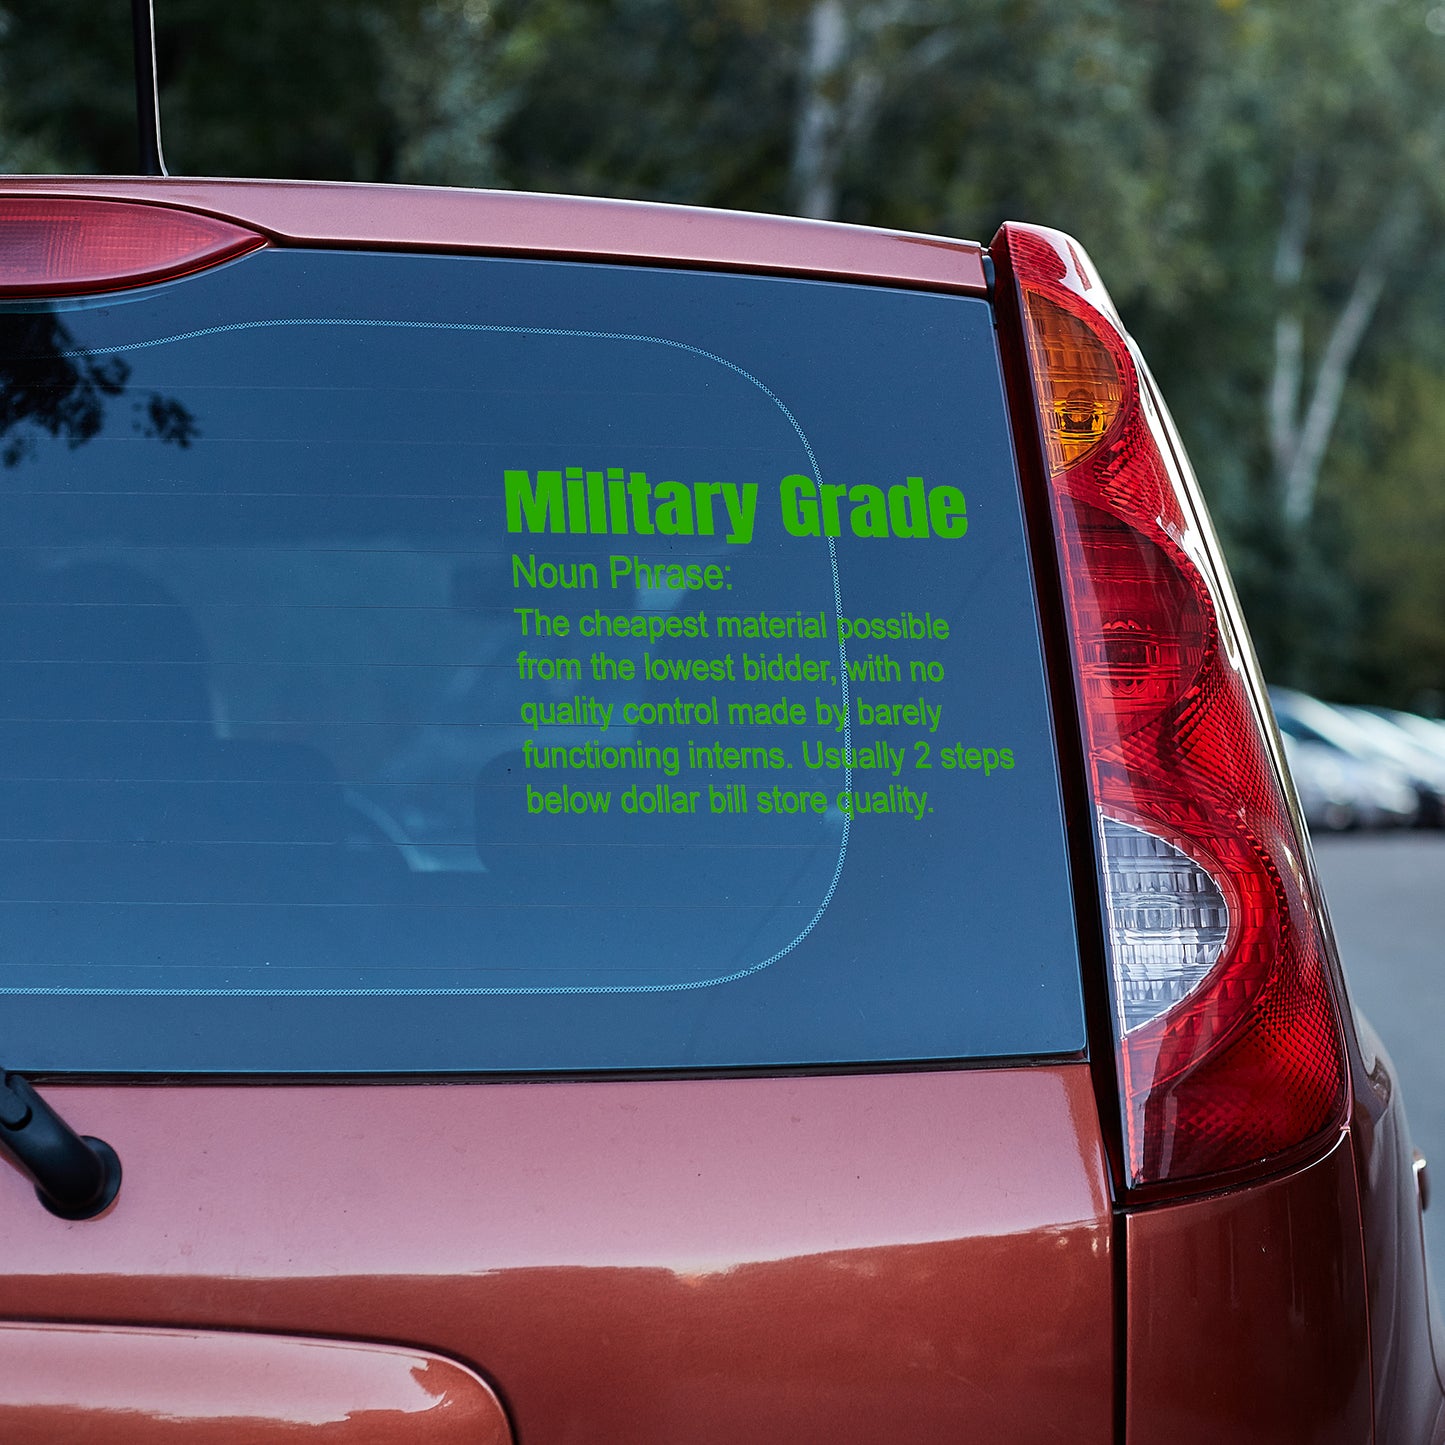 Military grade, it's not the flex you think it is vinyl decal adult beverage decal stickers Decals for cars Decals for Trucks minivan sticker Potato vodka SUV decals truck decals window decal car Window decals window decor